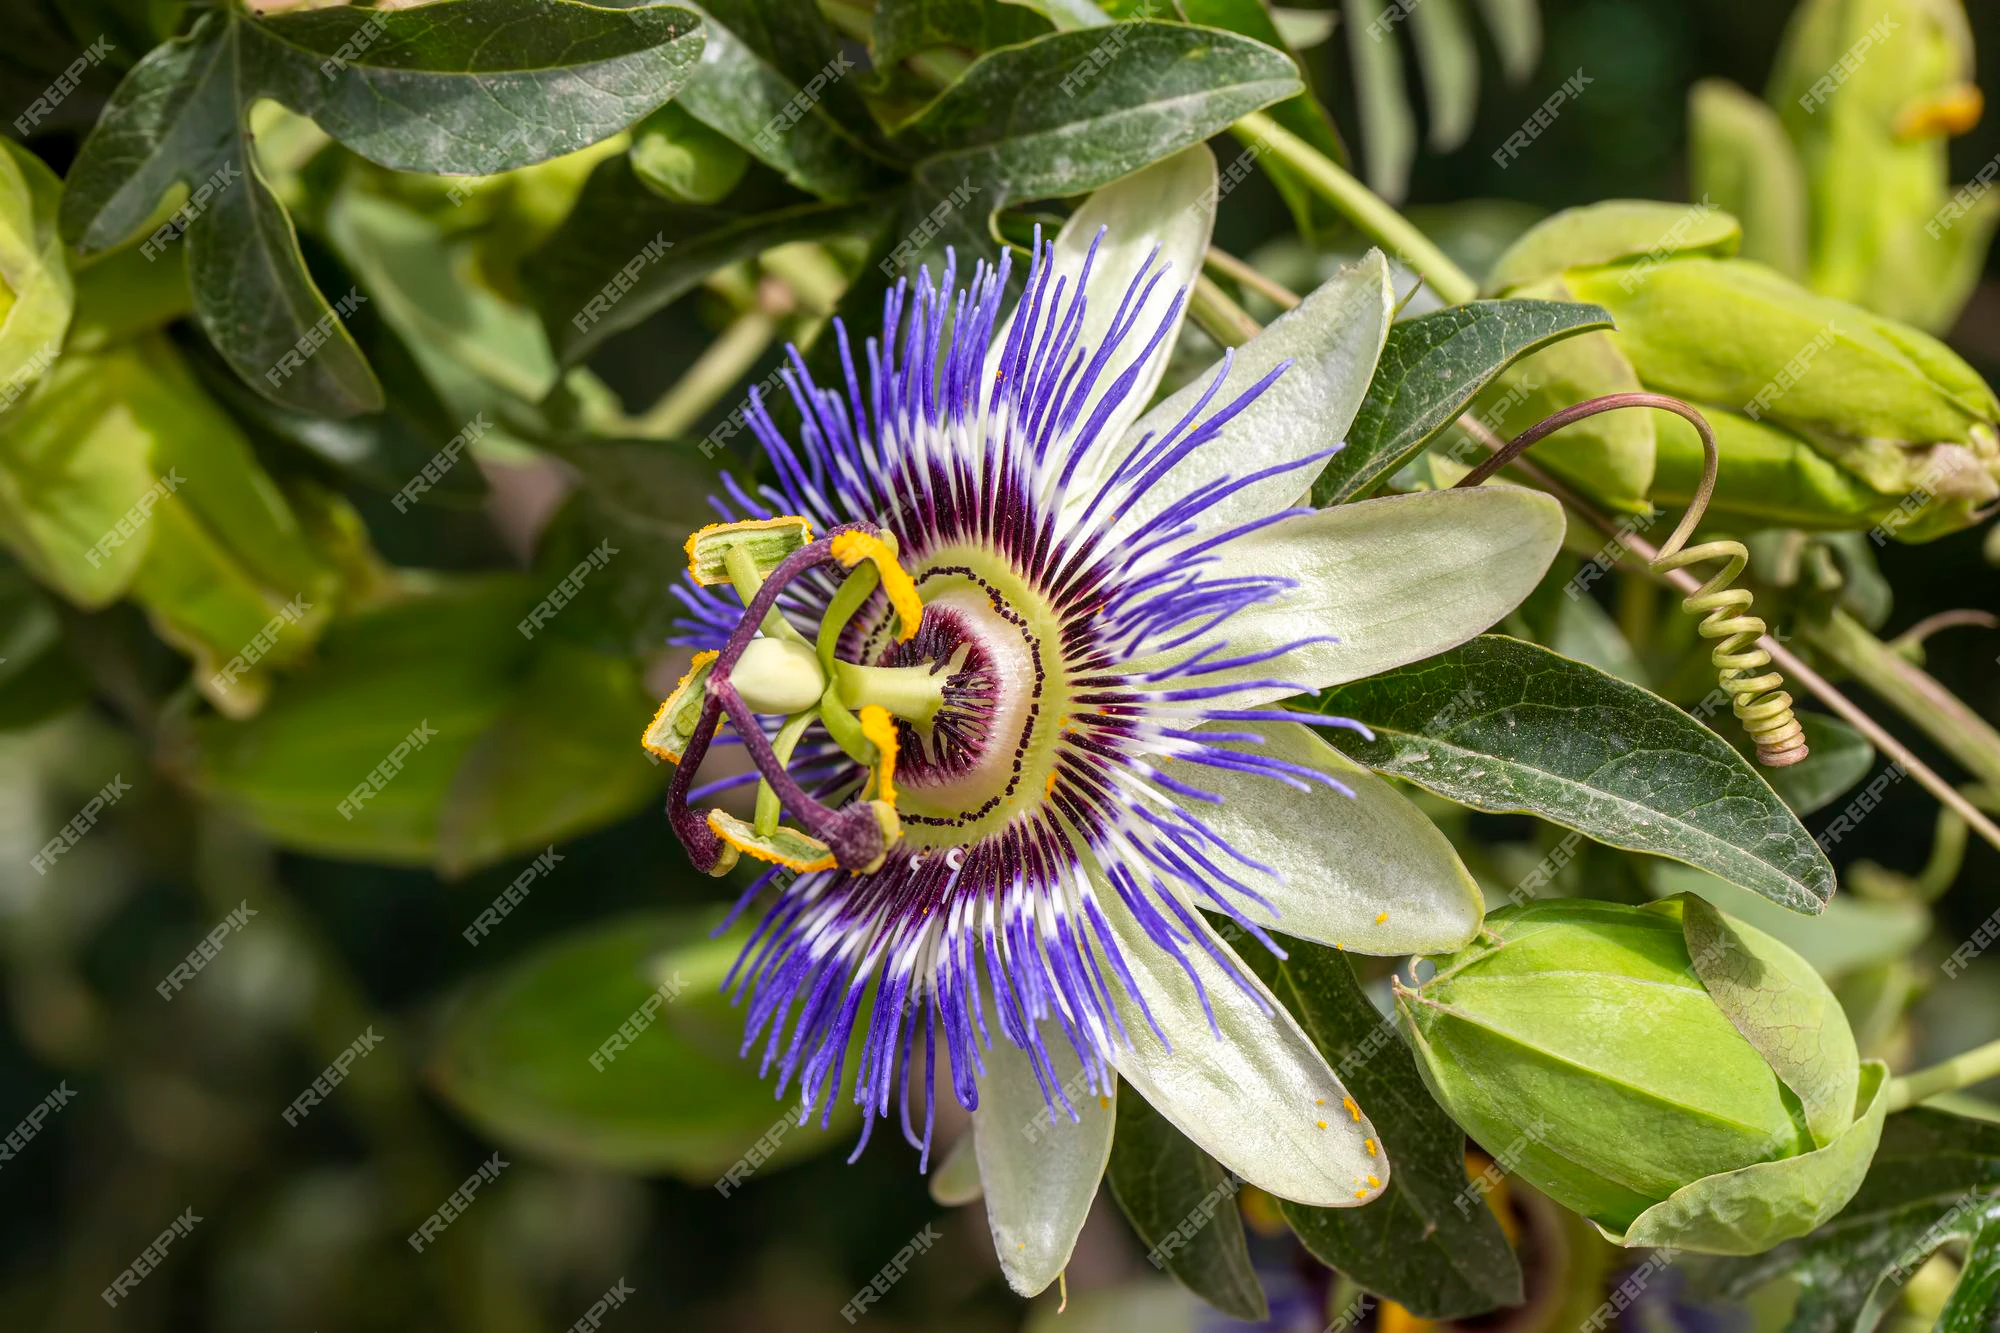 Passion Fruit Flowers: A Closer Look at Their Exquisite Blooms and Nutritional Wonders